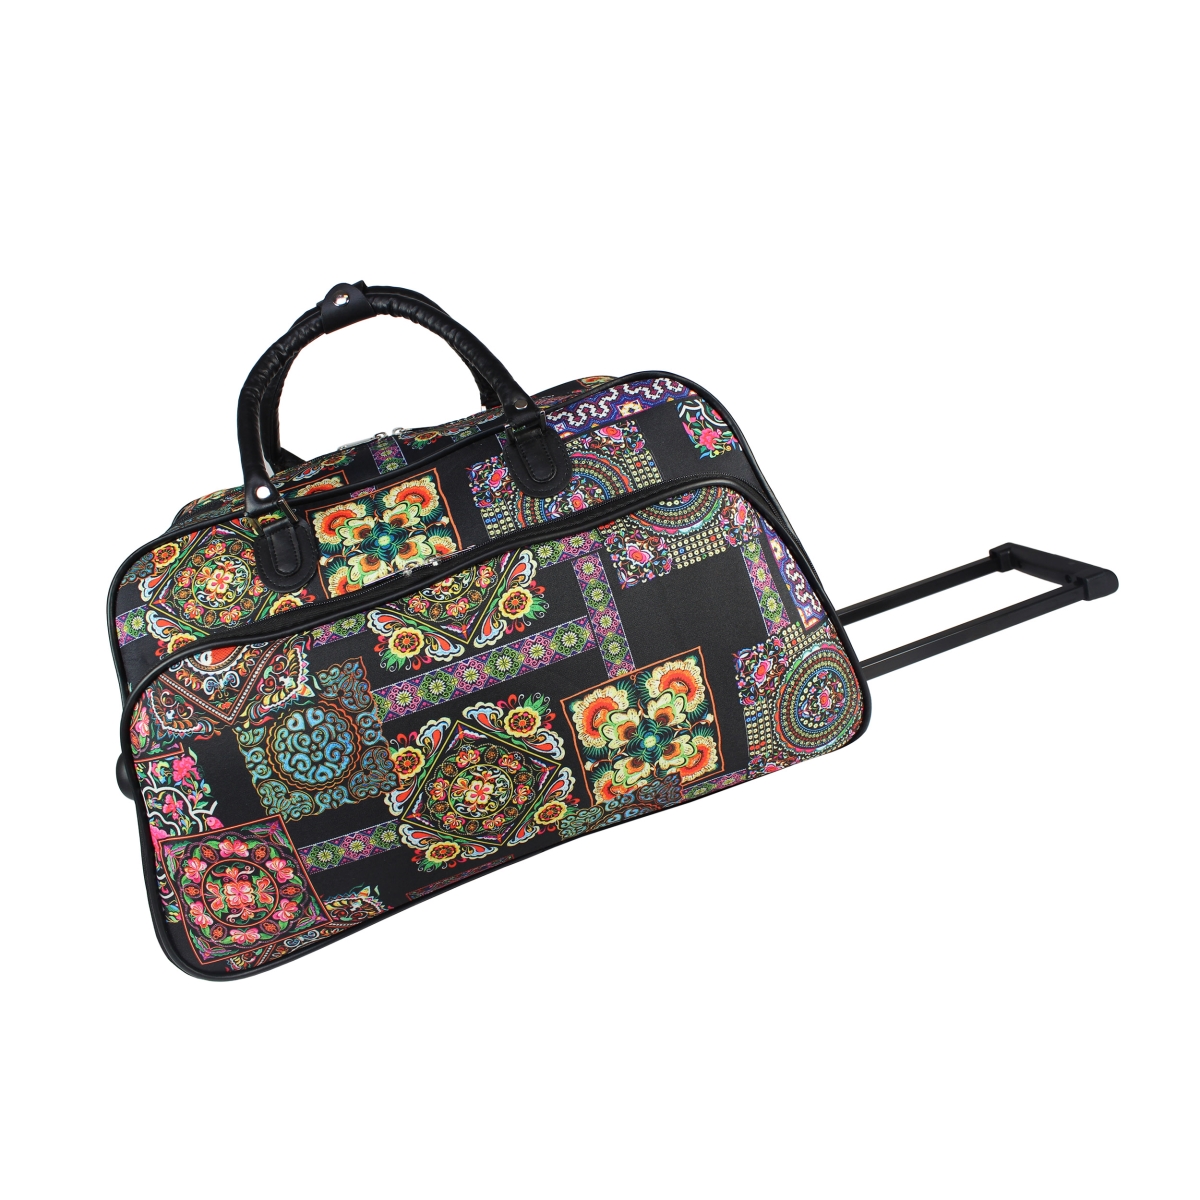 8112022-217 21 In. Carry On Rolling Duffel Bag - Multi Patchwork